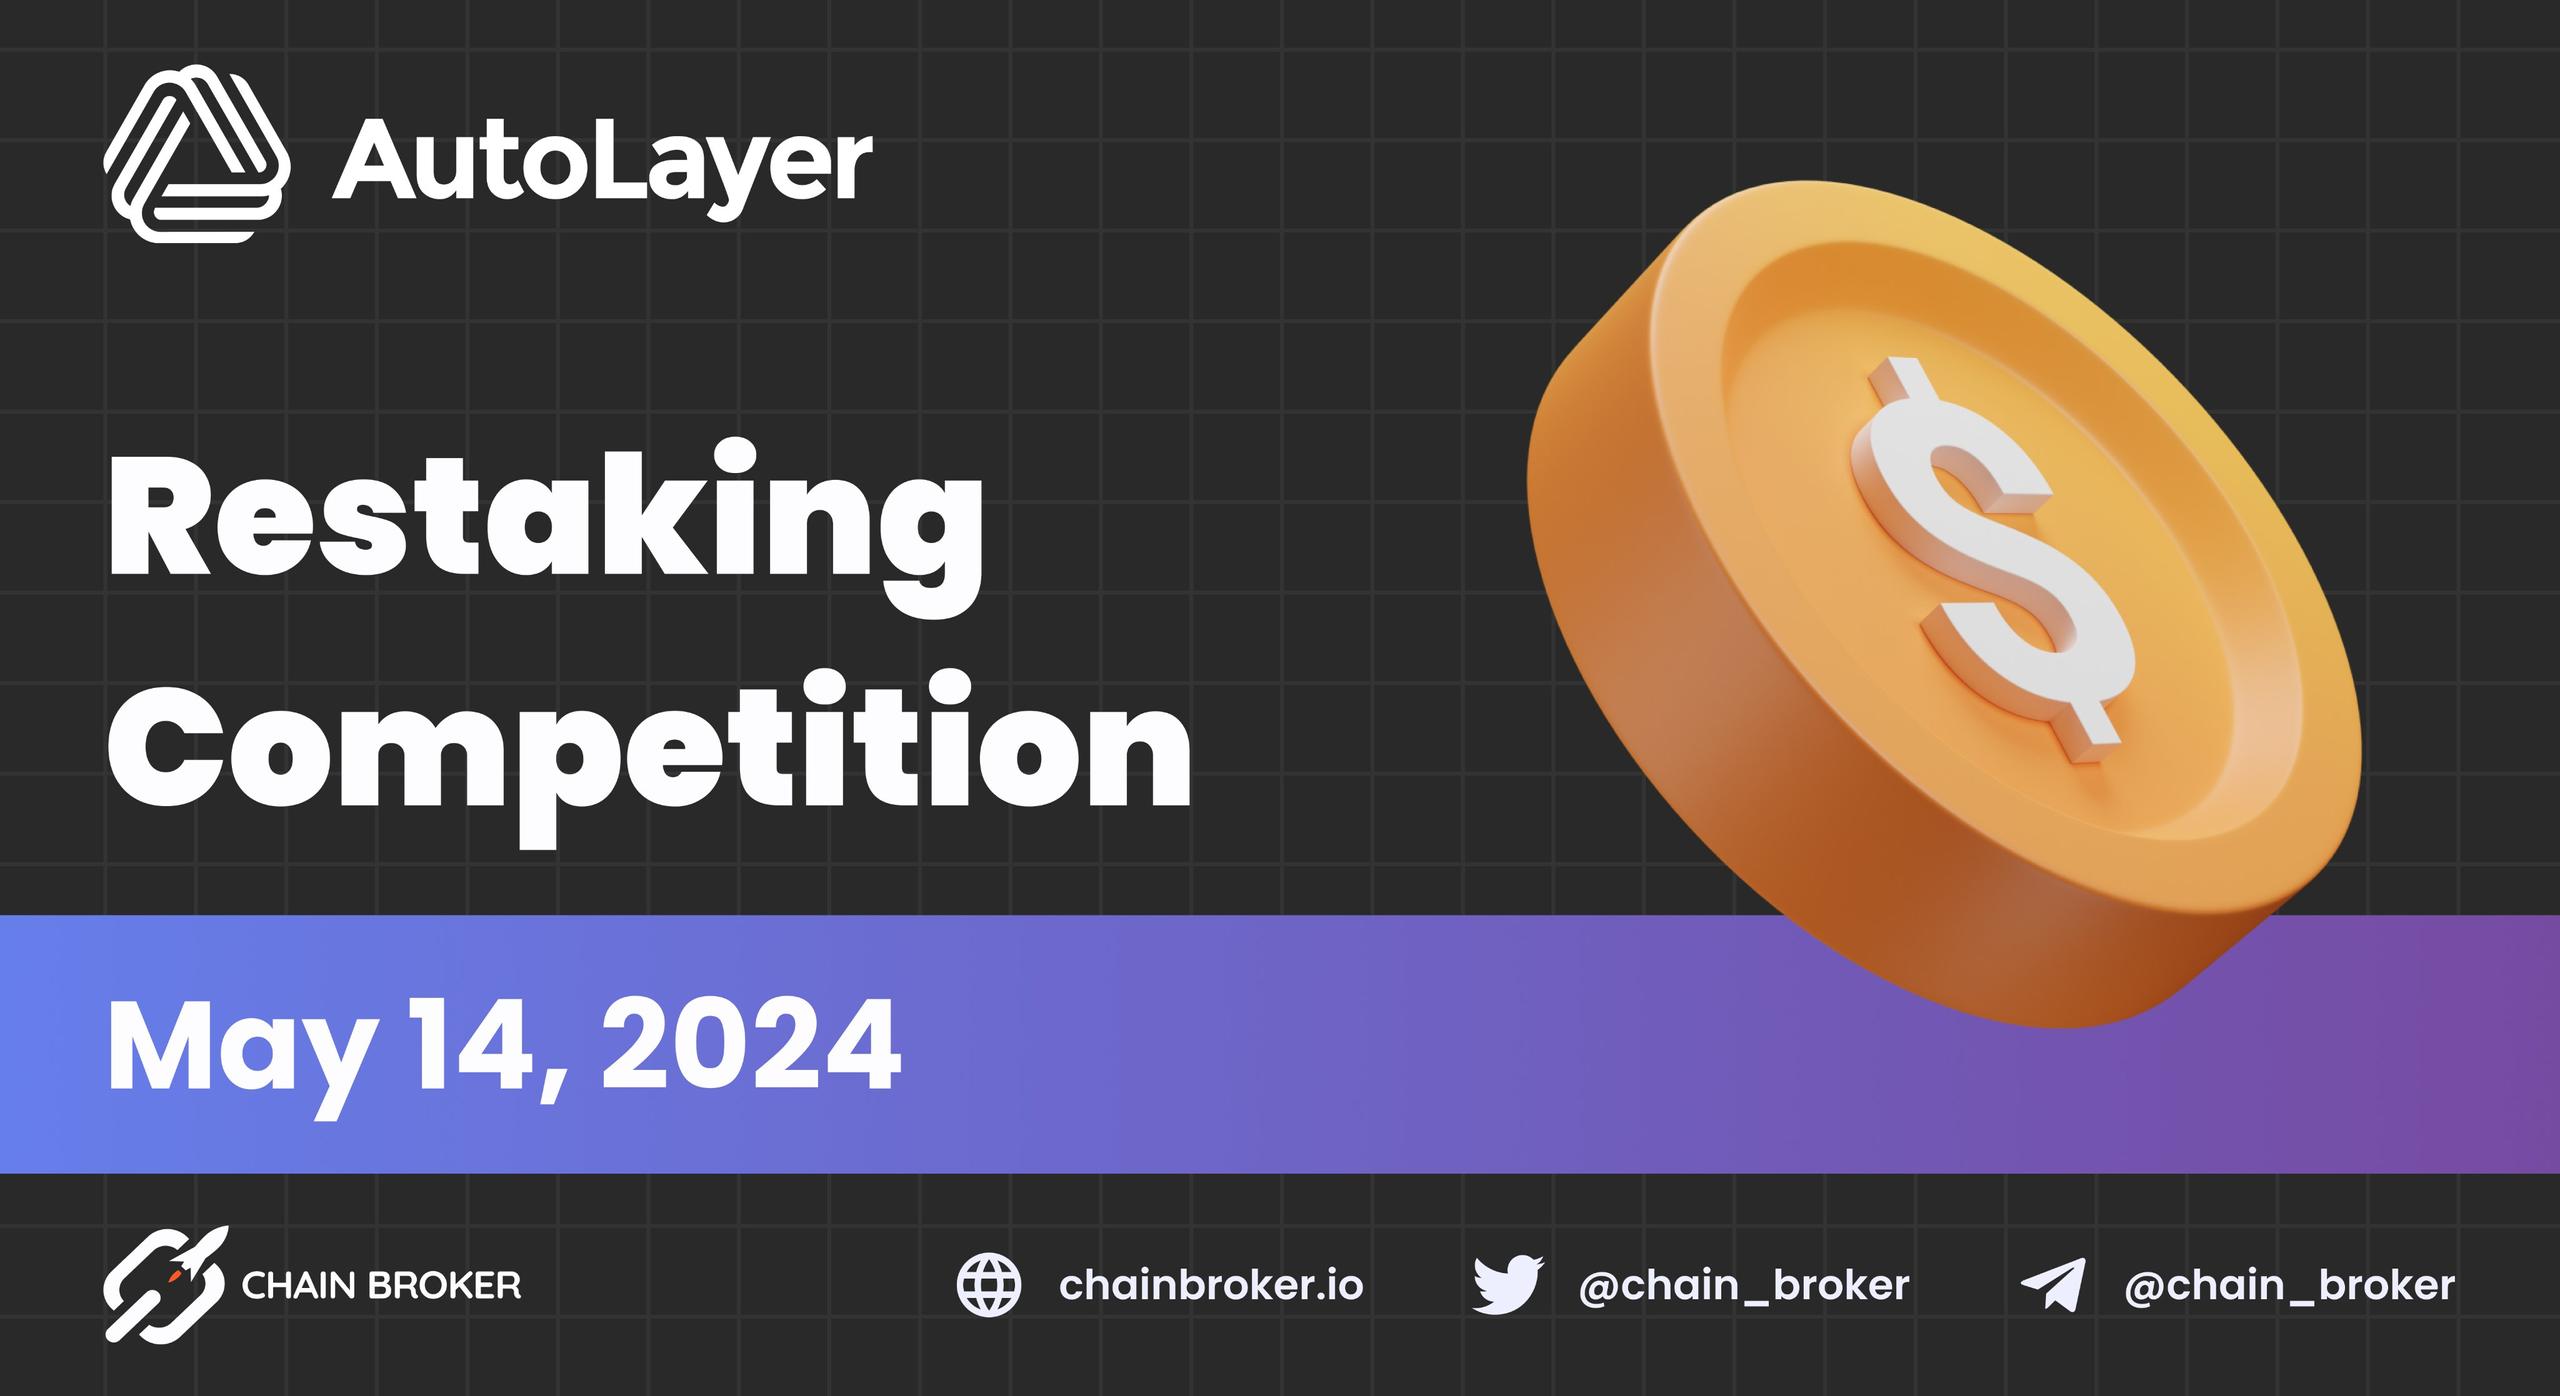 AutoLayer Restaking Competition is Live